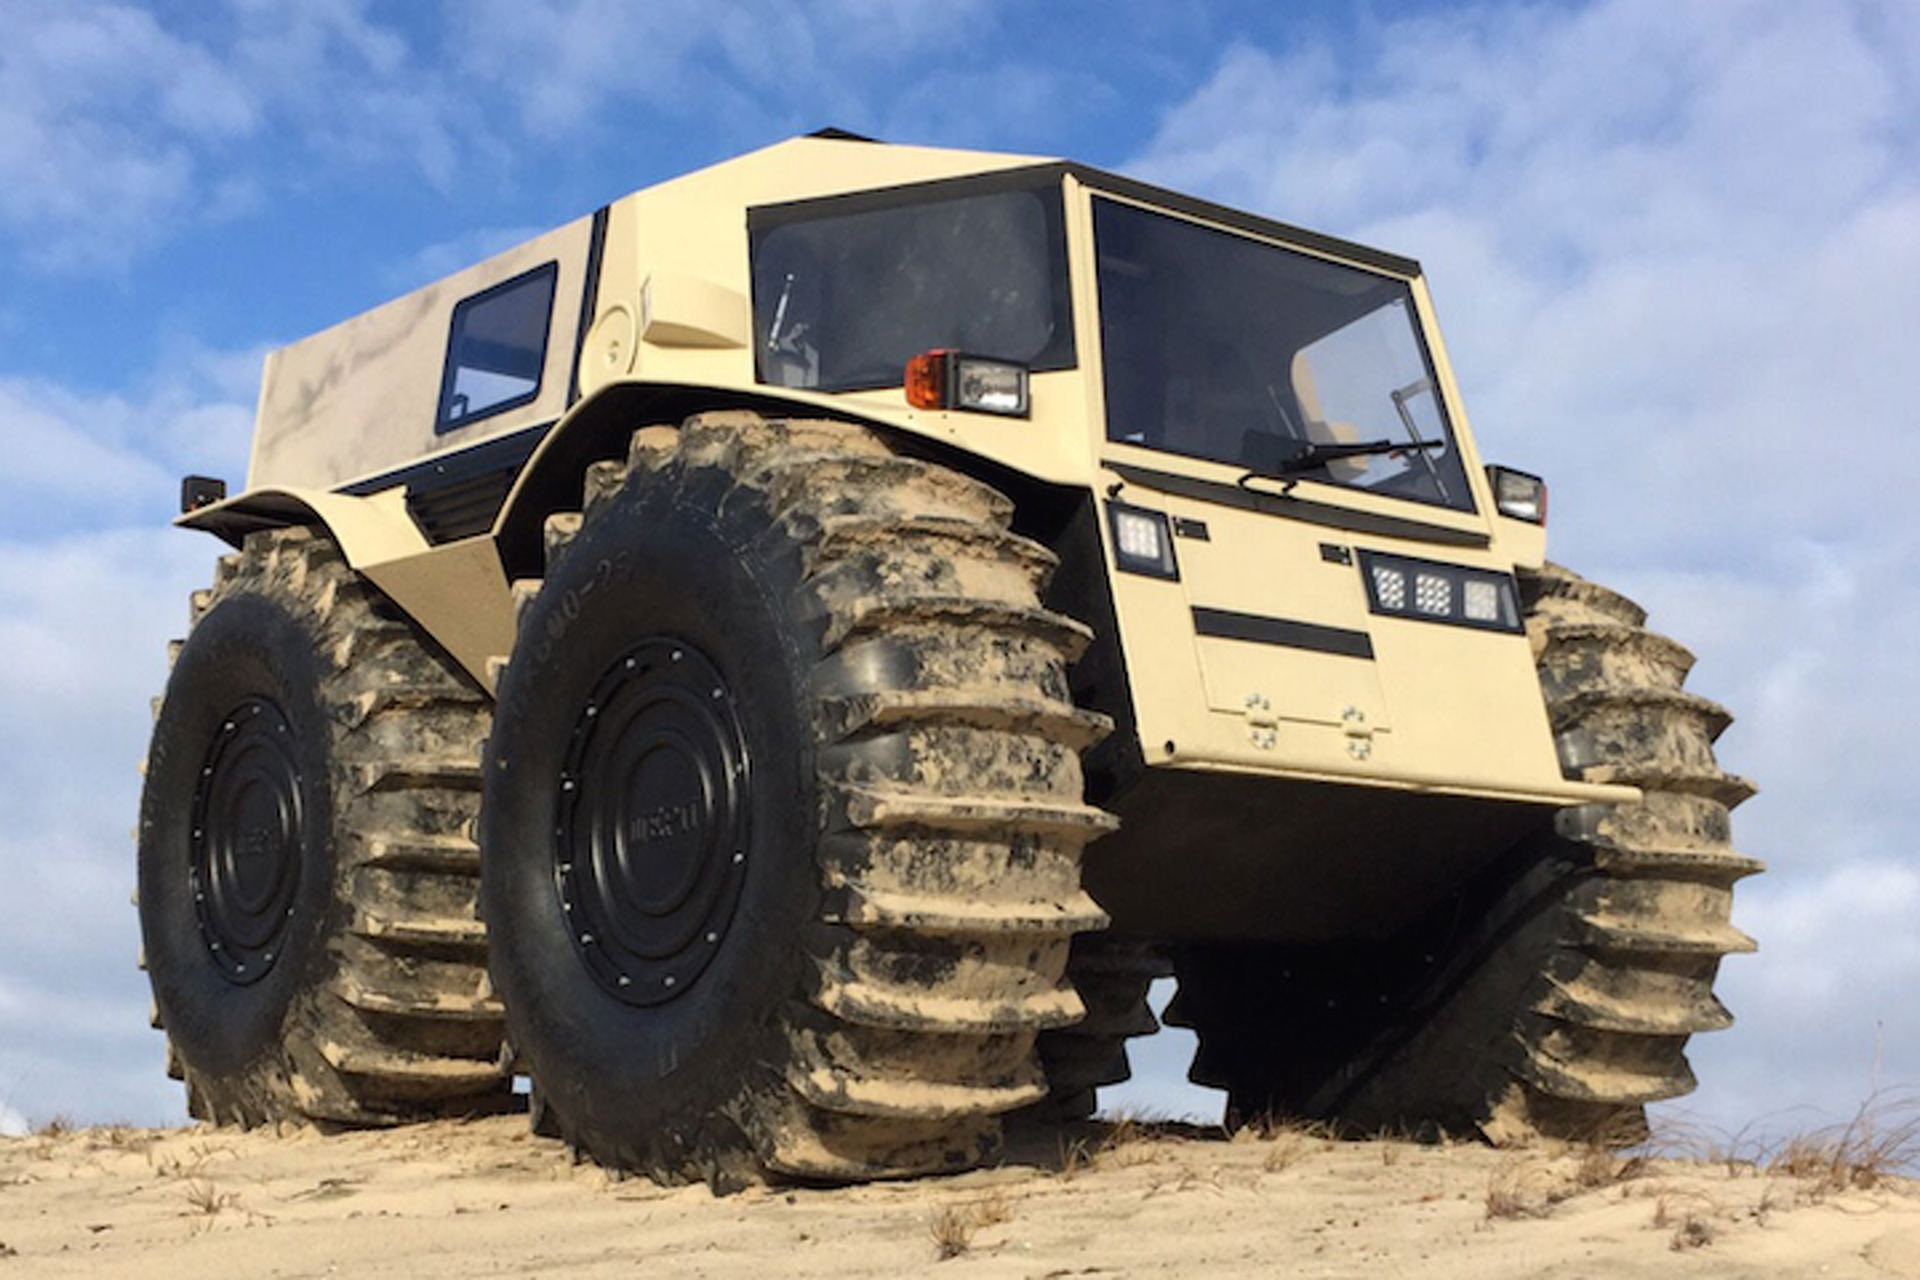 7 of Russia's Most Awesome Off-Road Vehicles